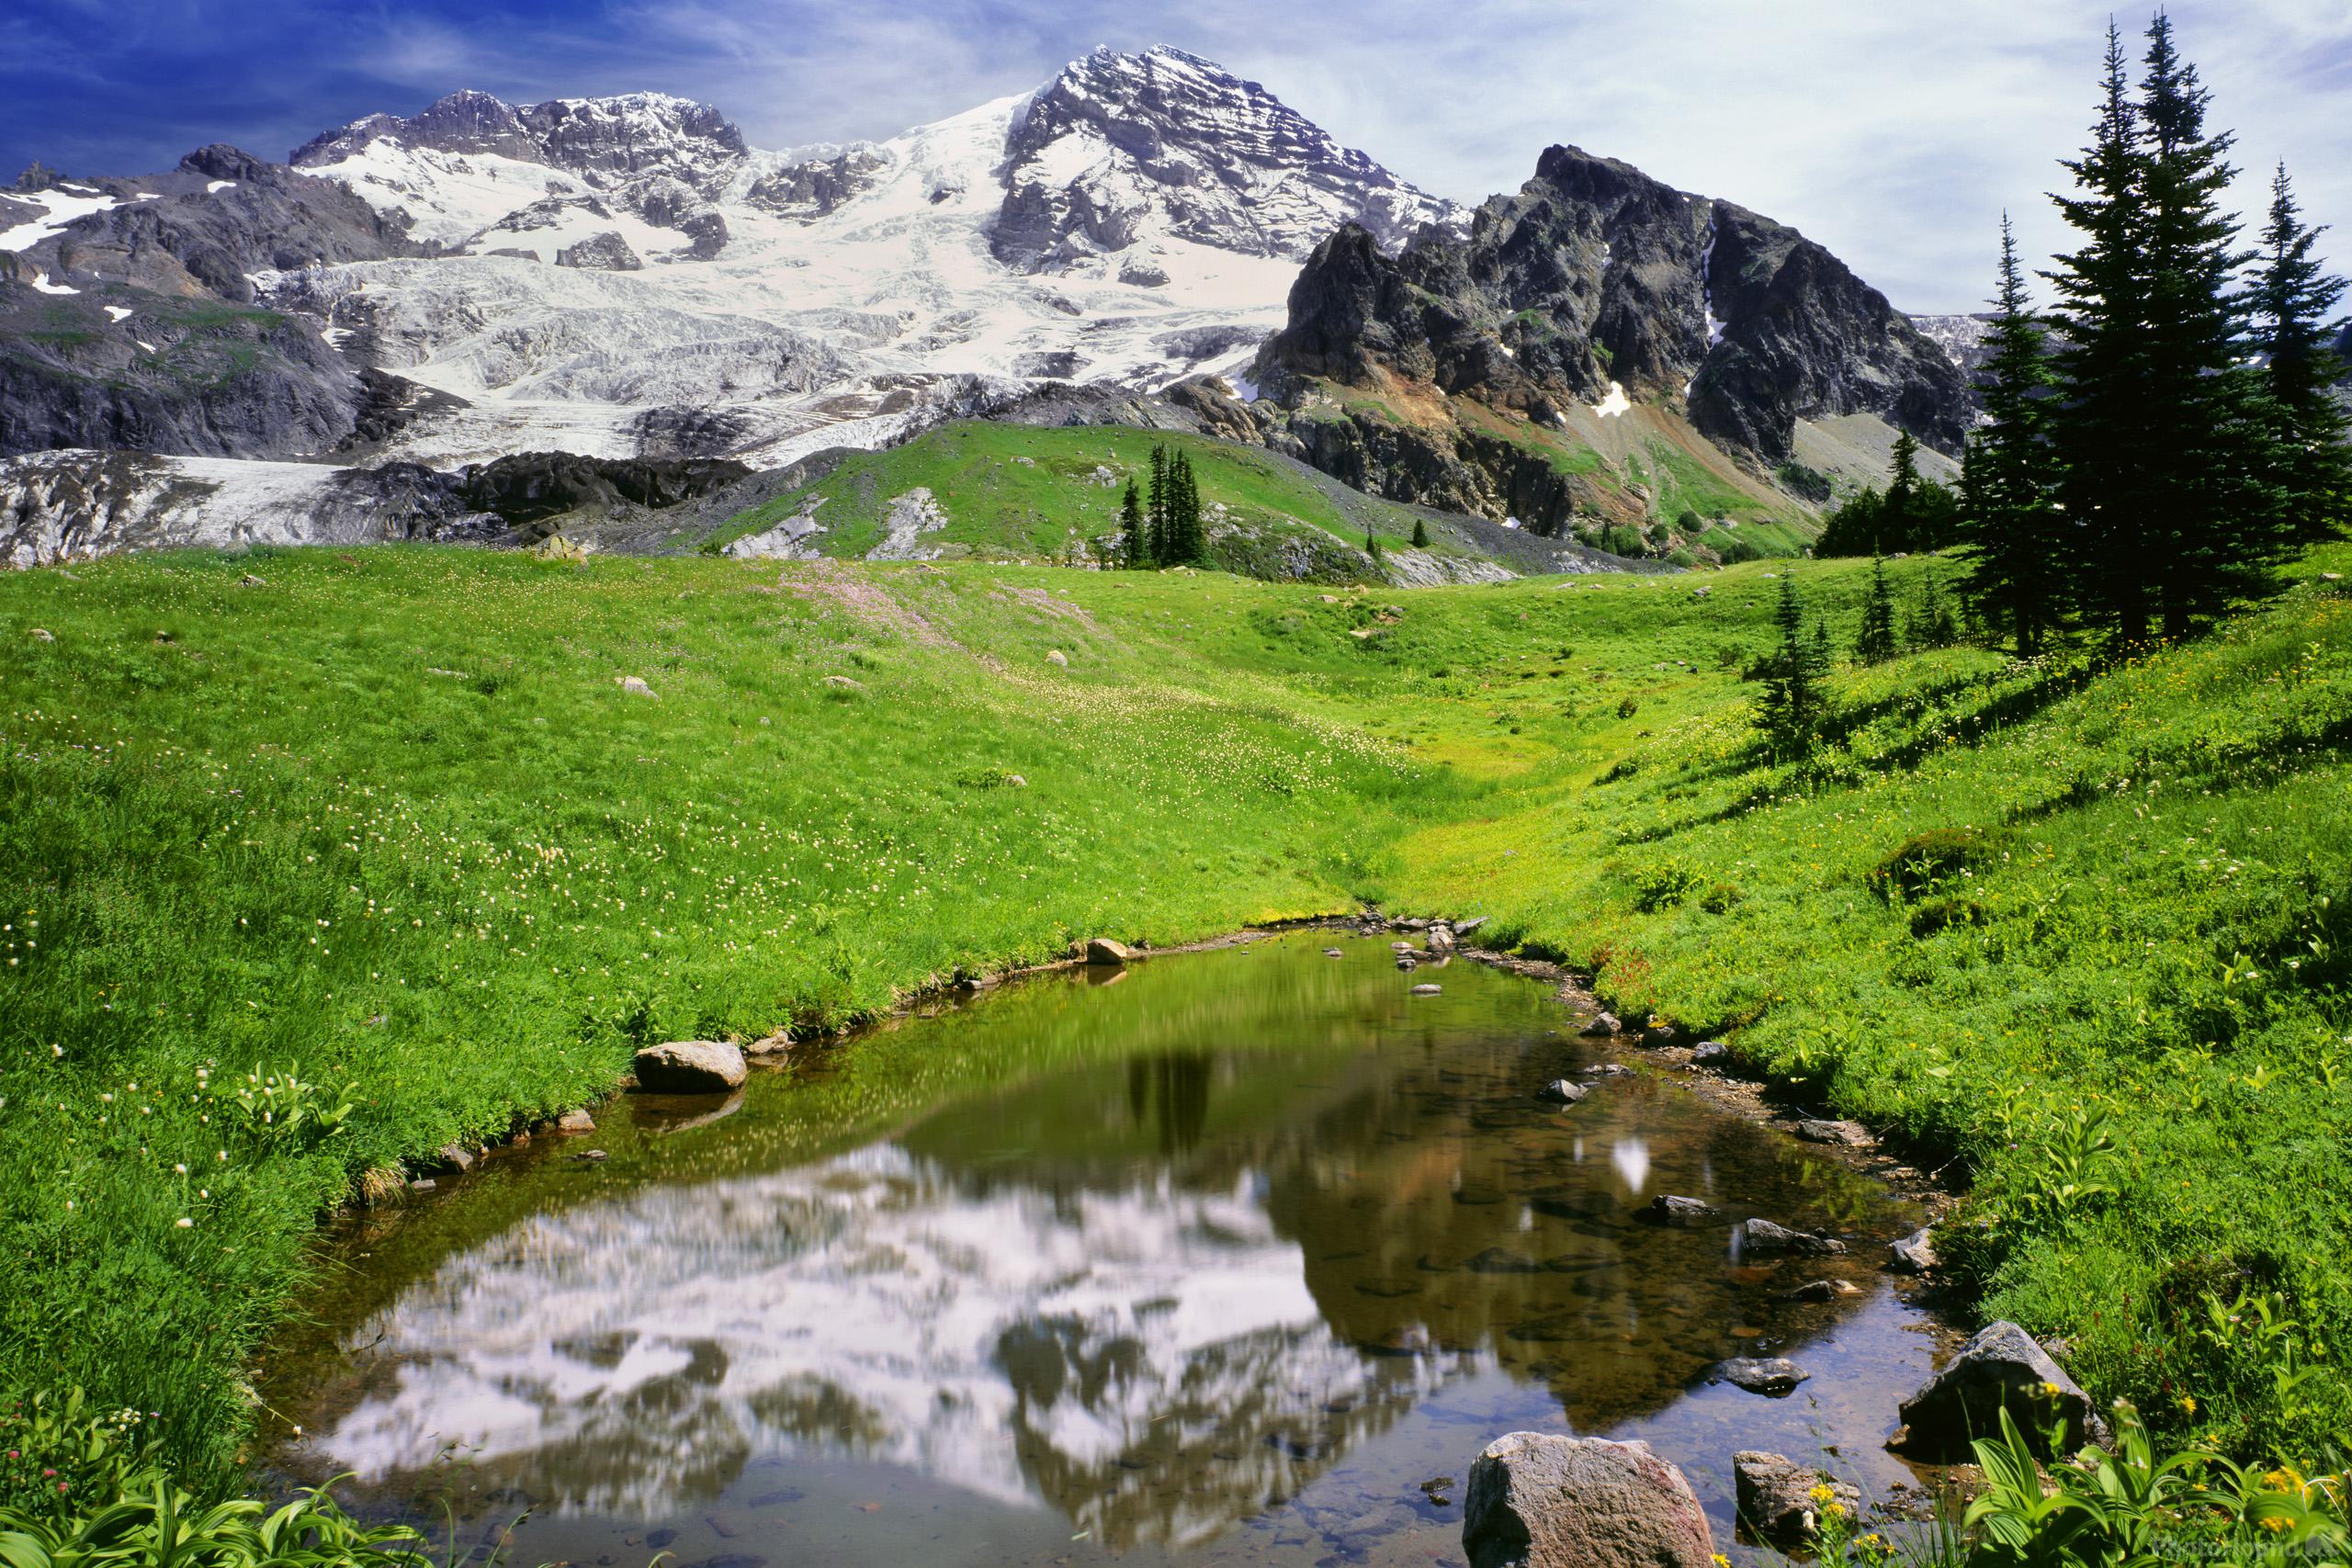 Image of Emerald Ridge, Mount Rainier National Park by T. Kirkendall and V. Spring